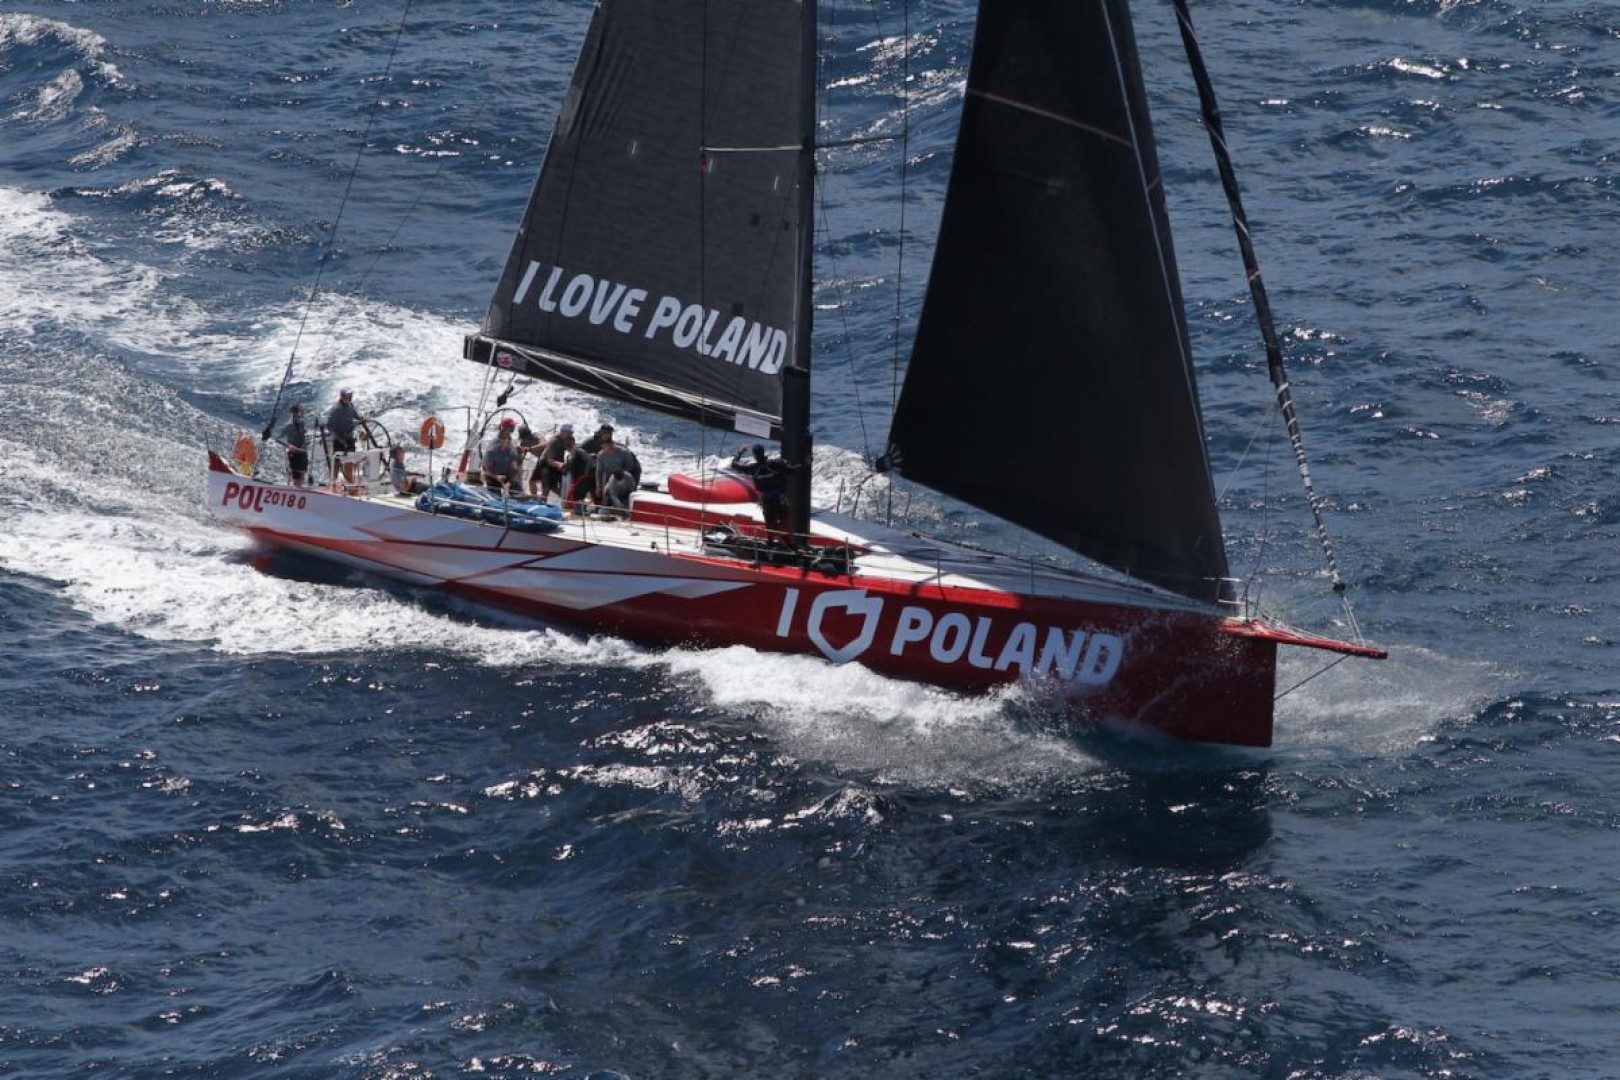 VO 70 I Love Poland, skippered by Conrad Lipski s a familiar sight in offshore races, including the Rolex Middle Sea Race. Image from the 2022 RORC Caribbean 600 © Tim Wright/RORC